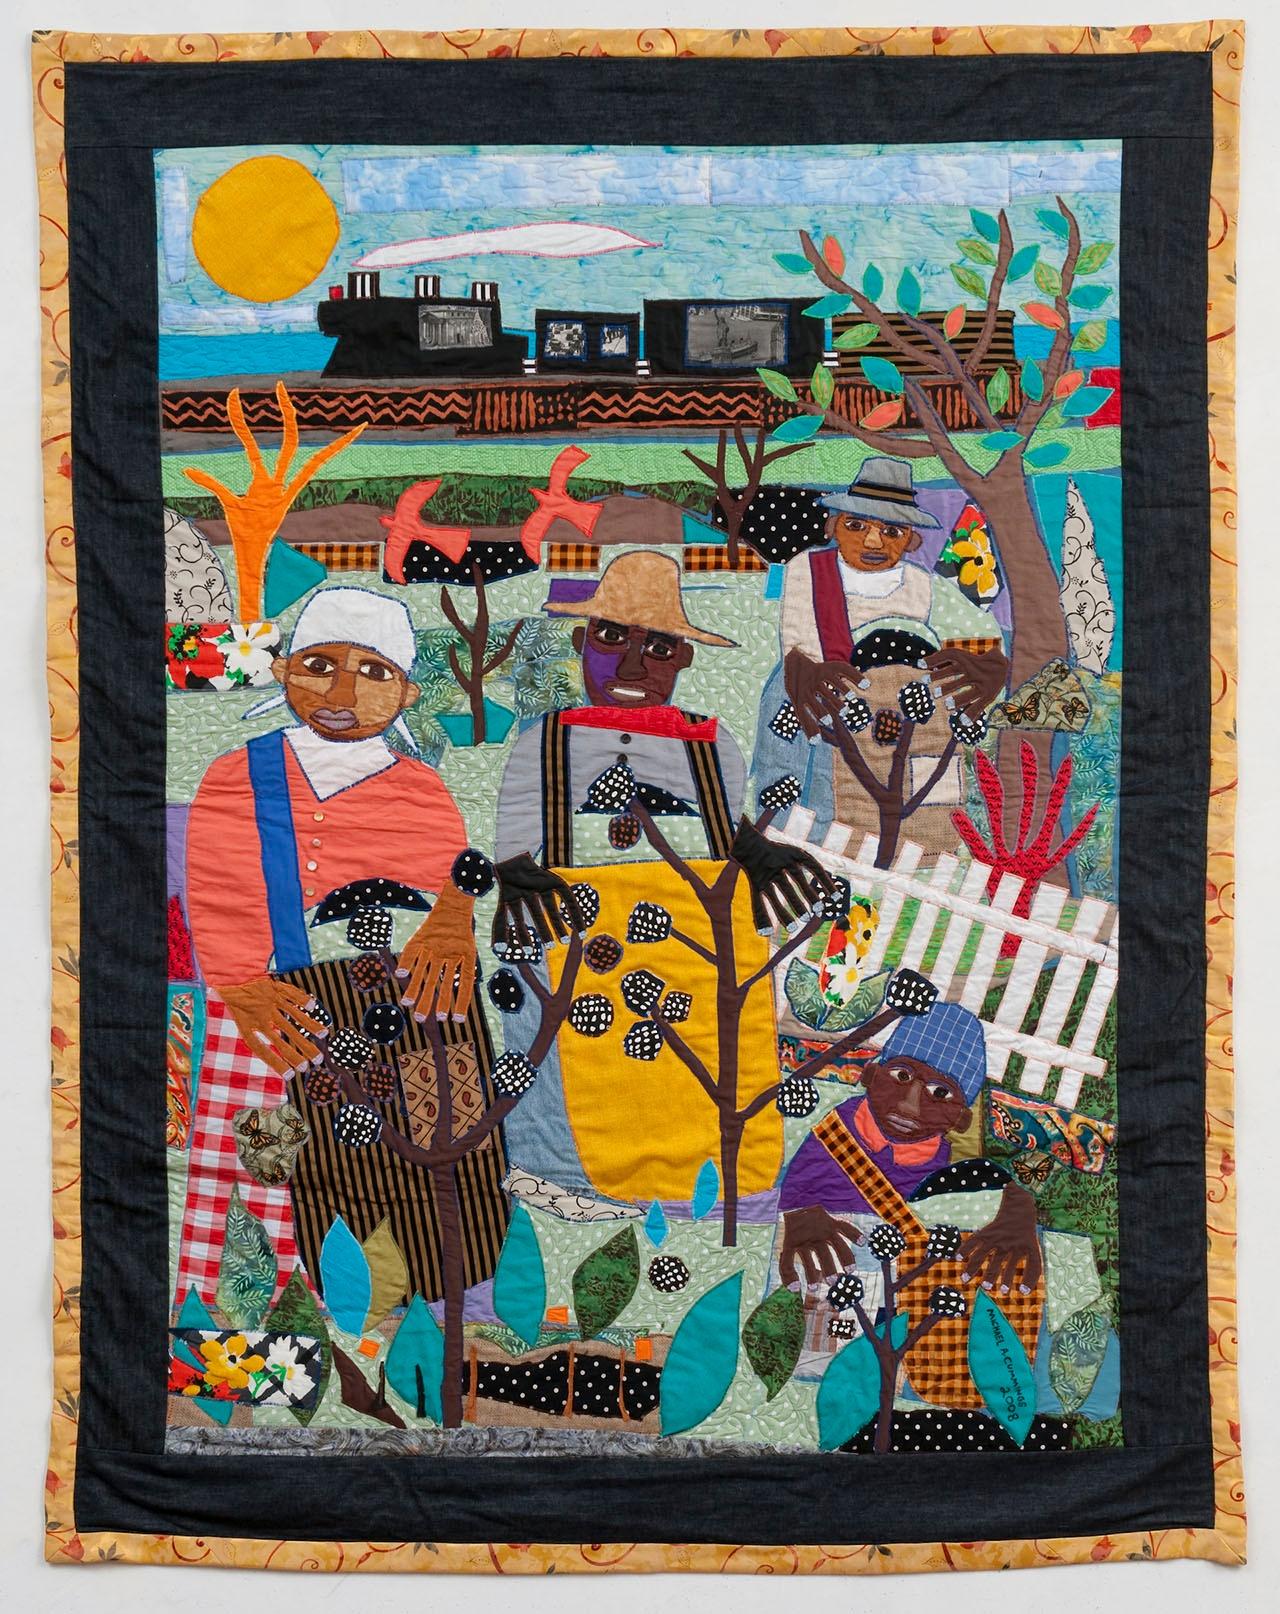 Michael A. Cummings, Mecklenburg County, 2008. Quilts episode, Craft in America